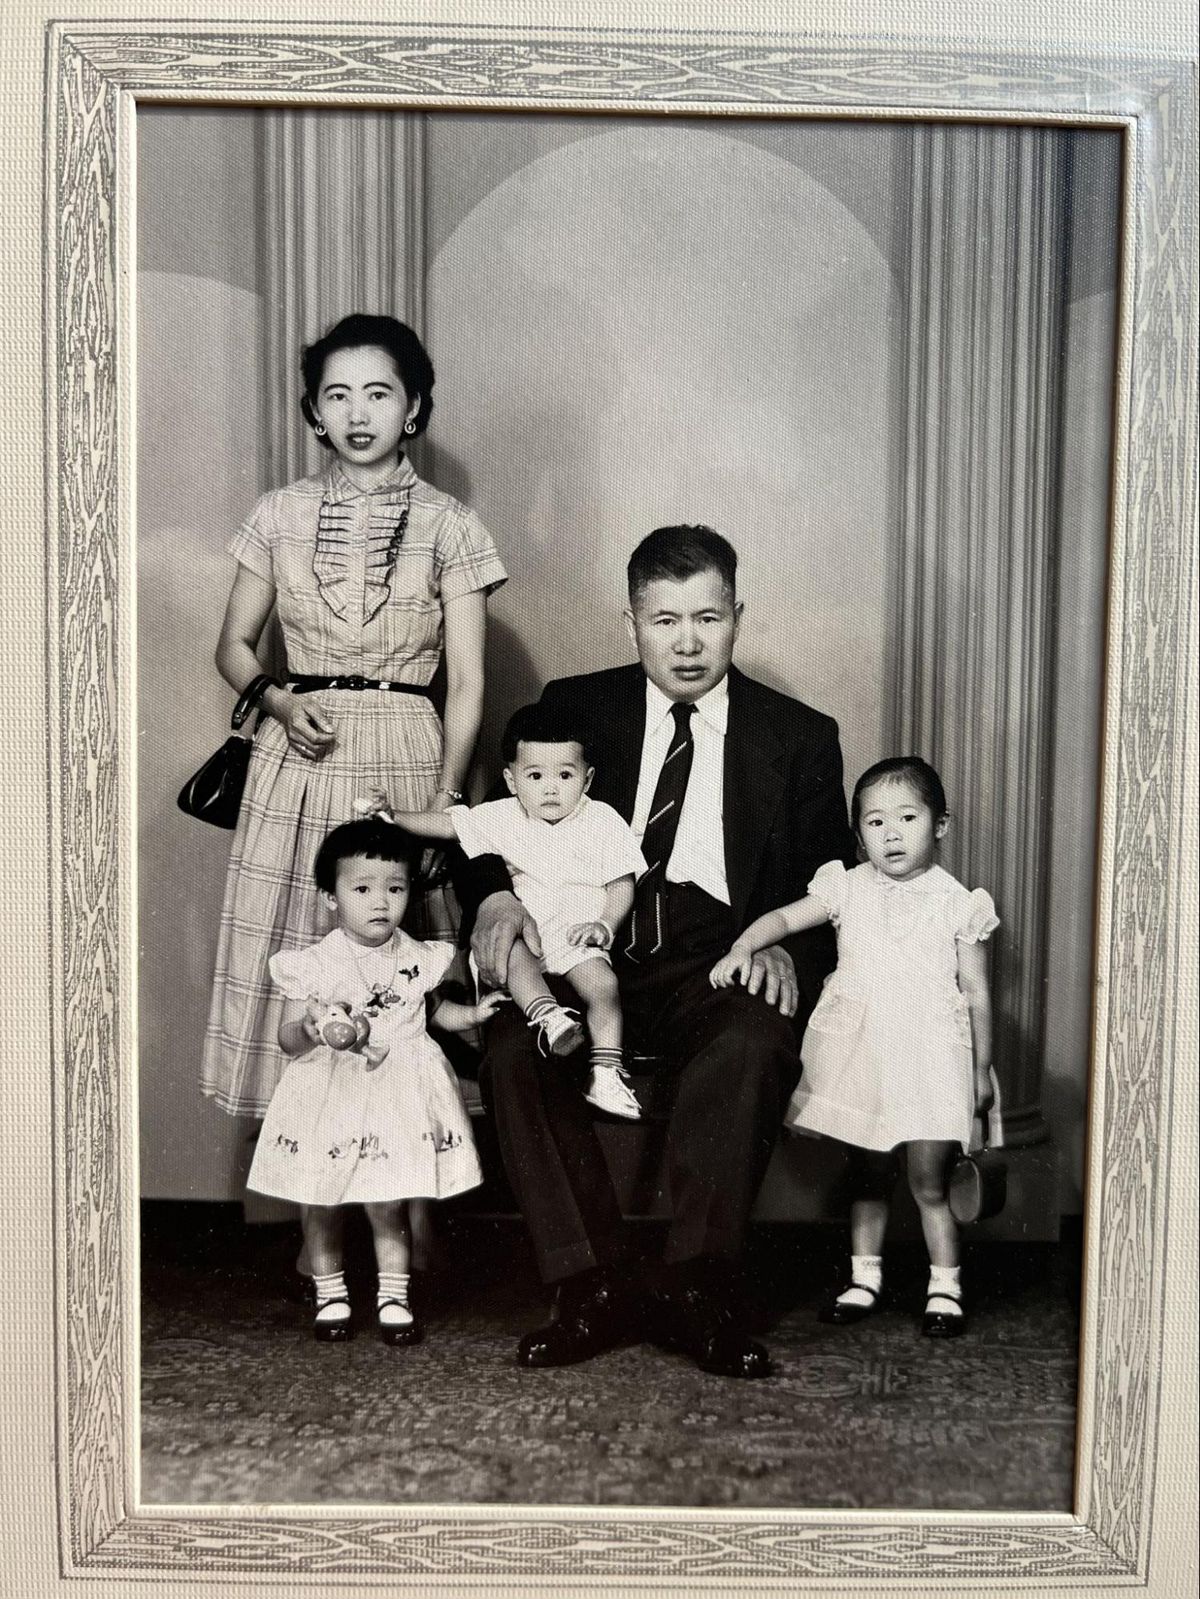 A woman in a plaid dress and holding a black bag standing to the left, a man in a black jacket, dark tie, white shirt sitting holding a baby, two small children in dresses standing in front.